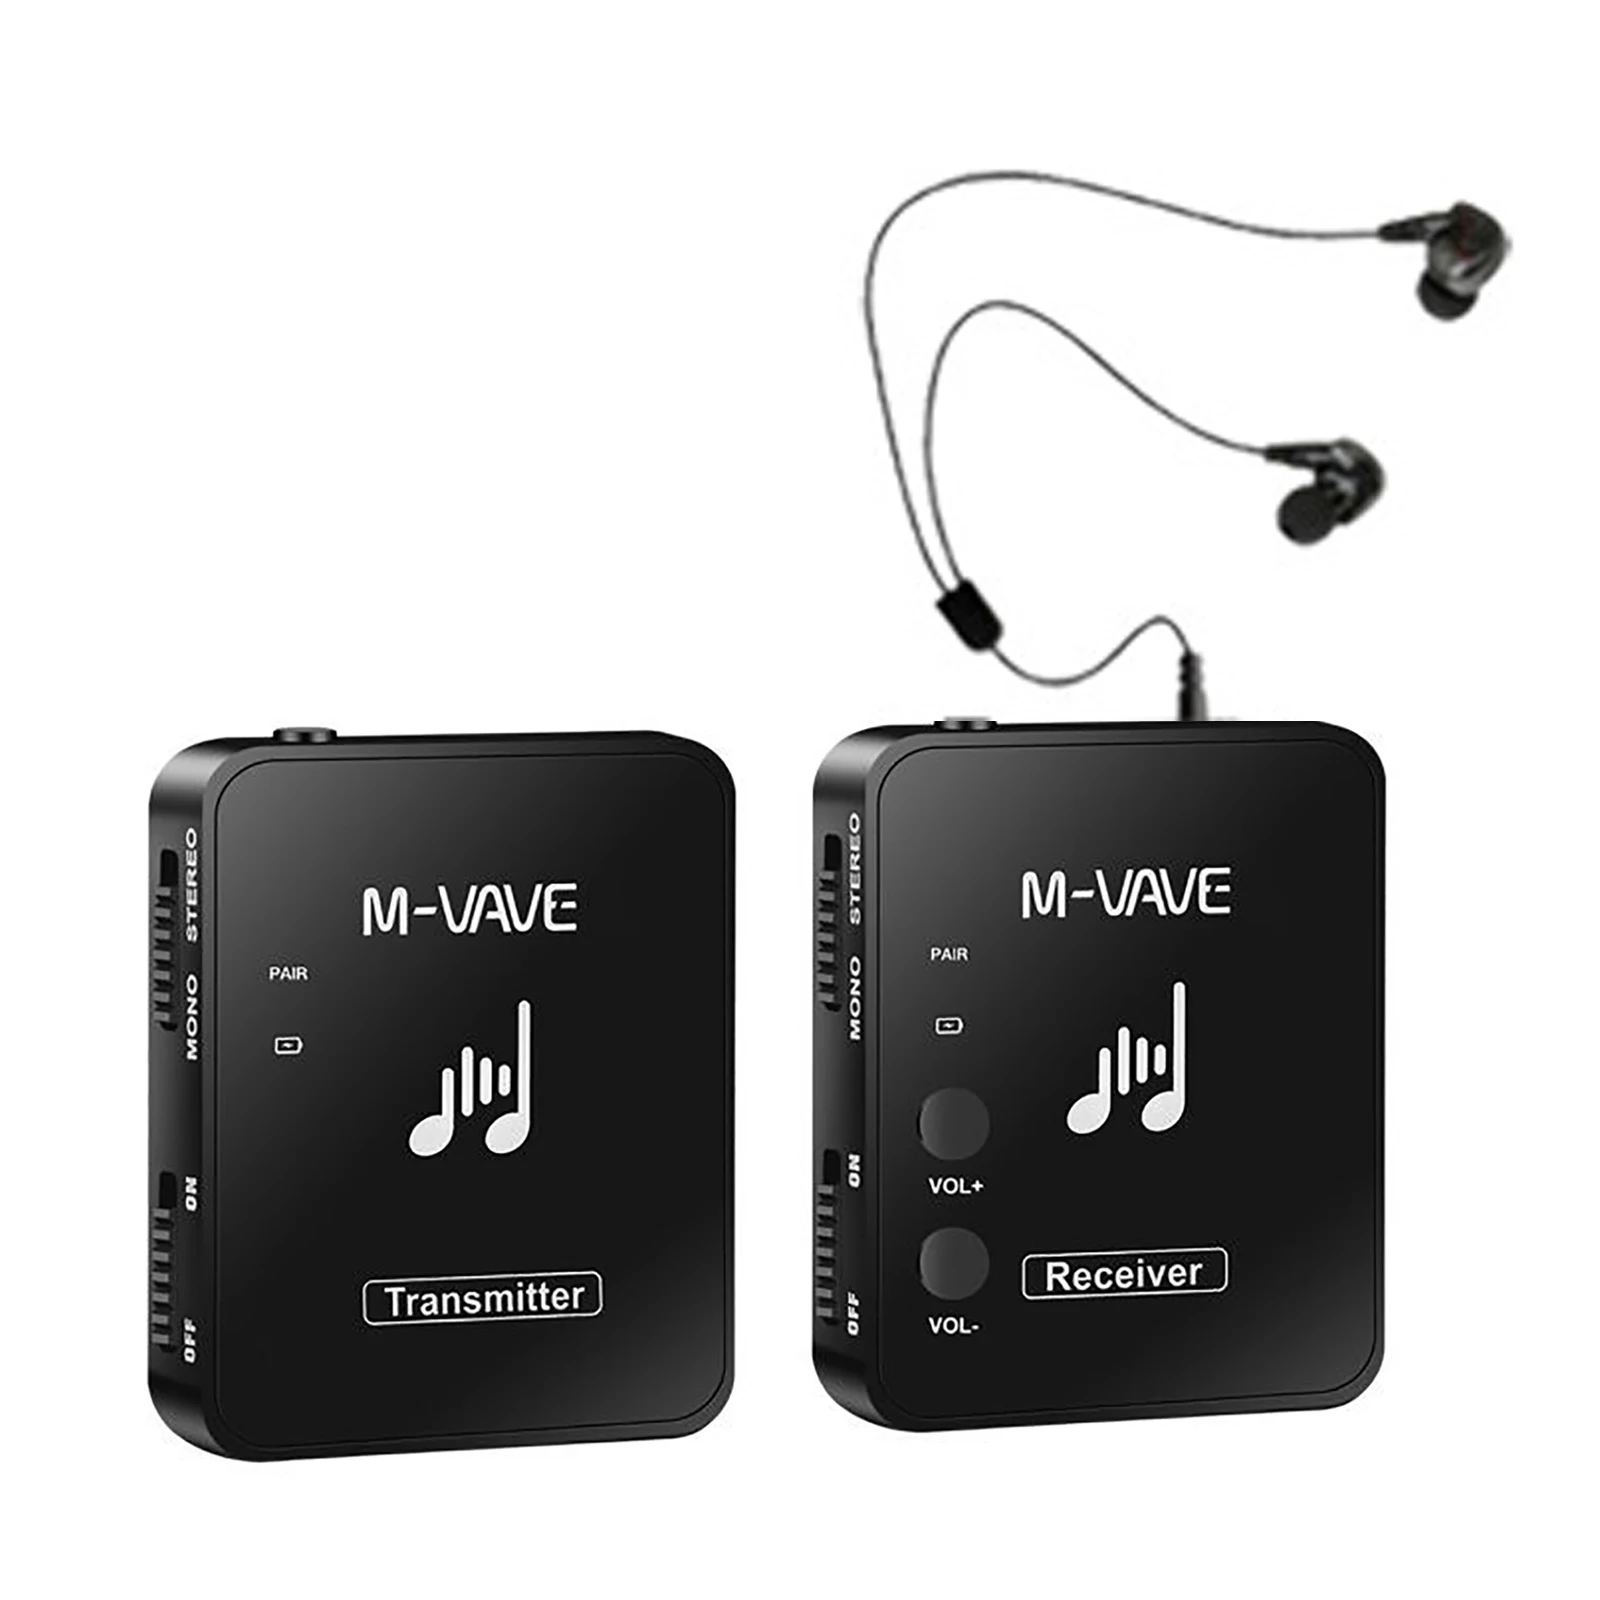 2.4G Wireless Earphone Monitor Rechargeable Transmitter Receiver Support Stereo Mono Recording Function Cuvave M-vave WP-10